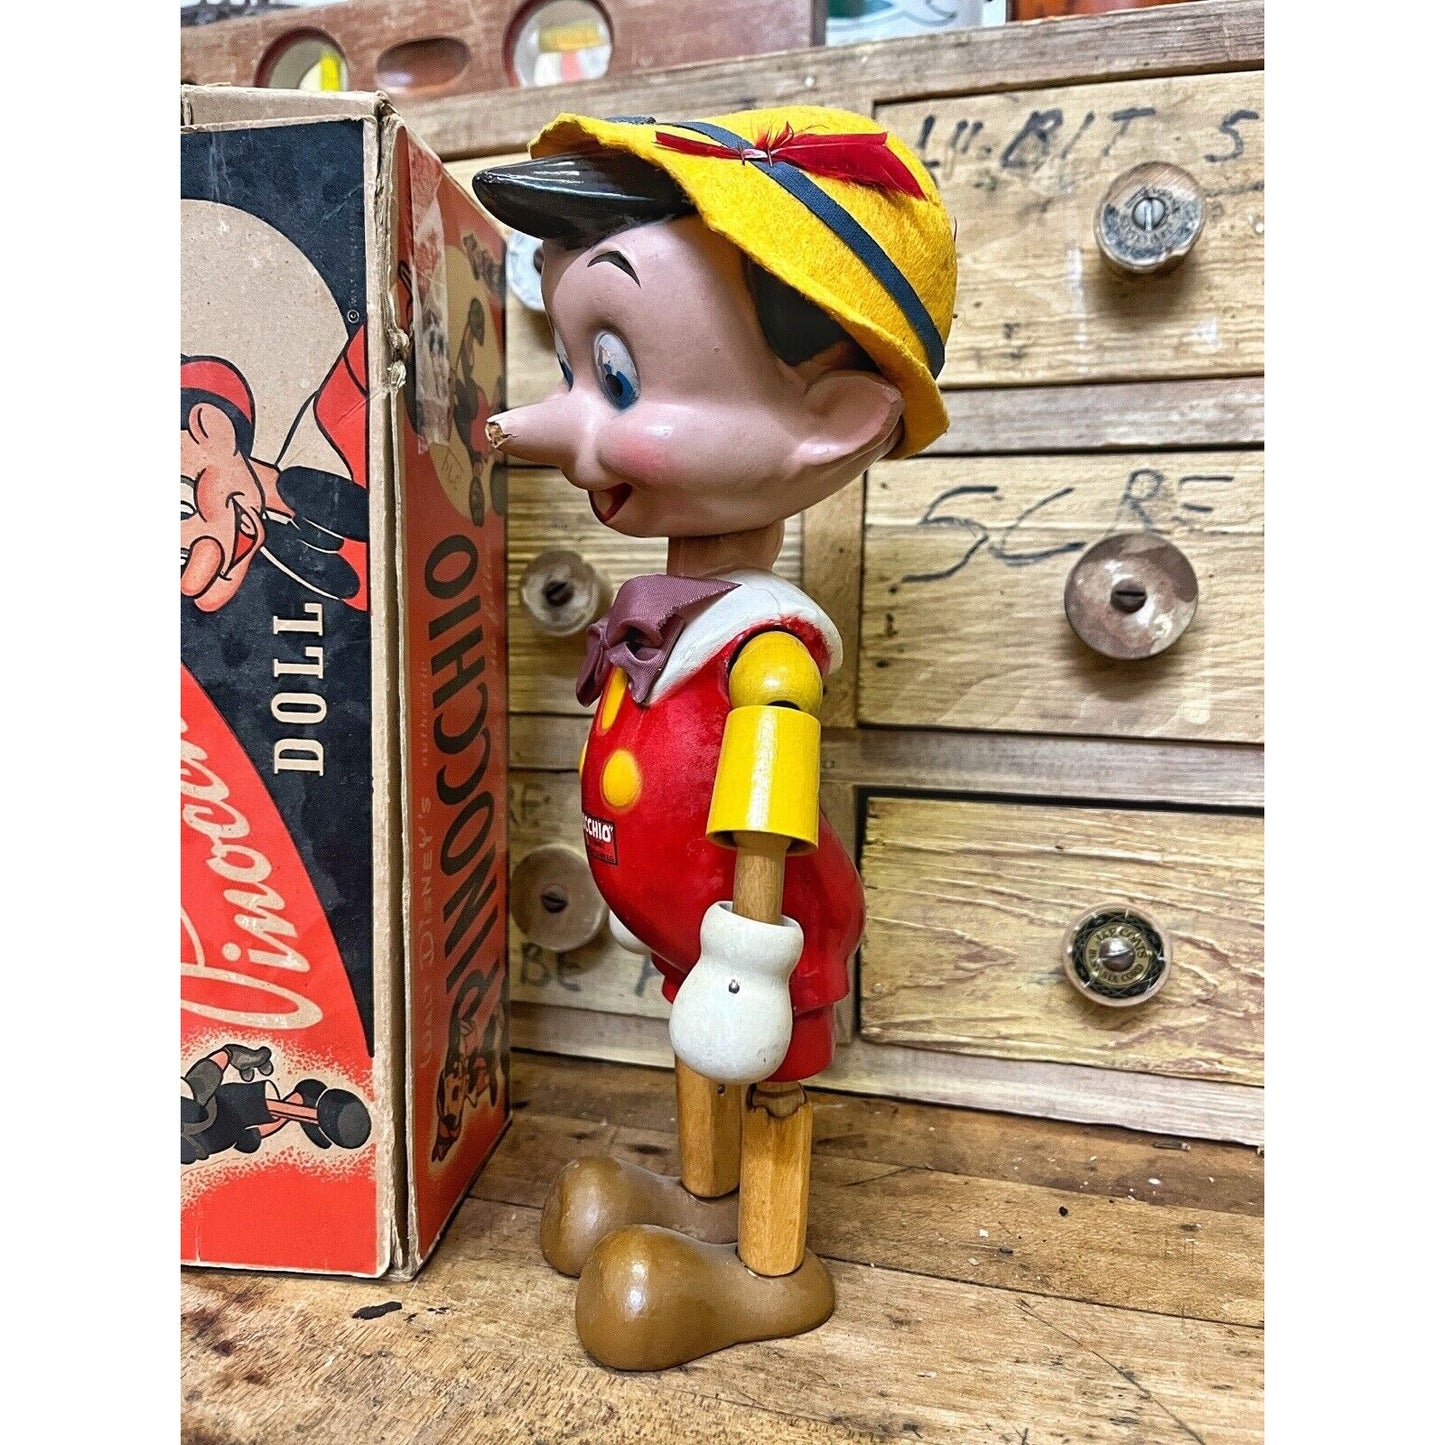 Vintage 18" PINOCCHIO Wooden Articulated Doll by Ideal Novelty & Toy Co. w/ Box